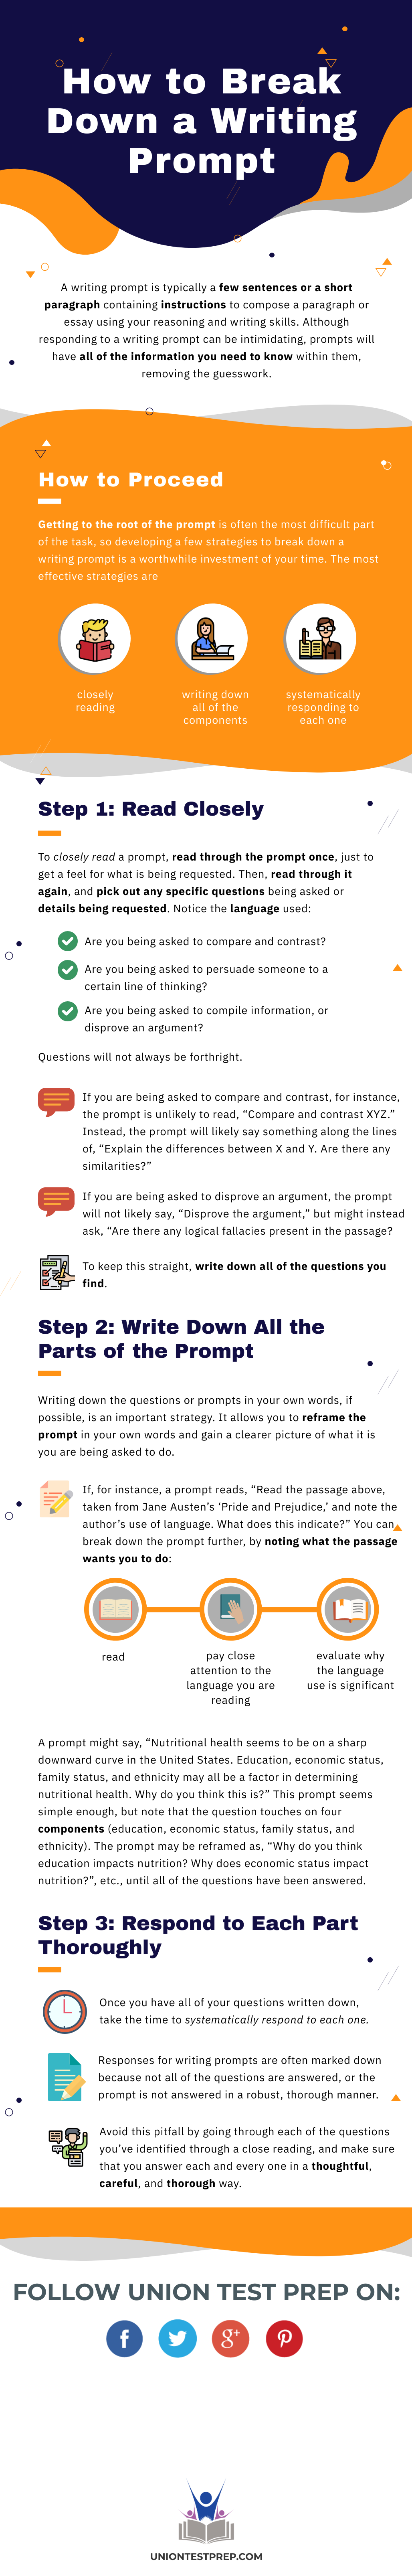 How to Break Down a Writing Prompt